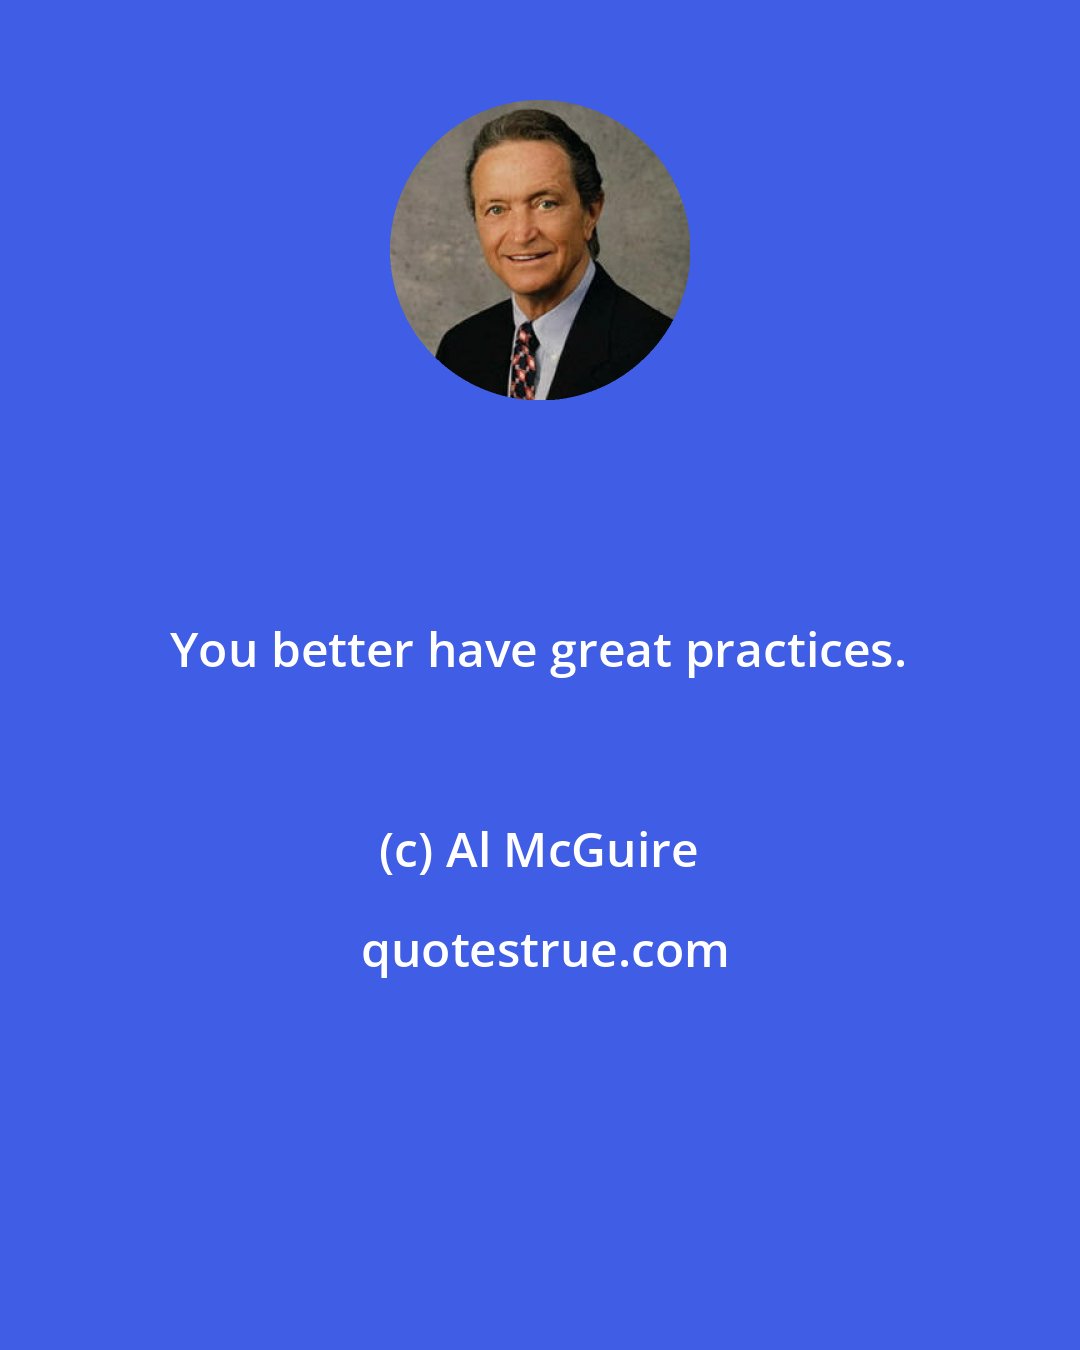 Al McGuire: You better have great practices.